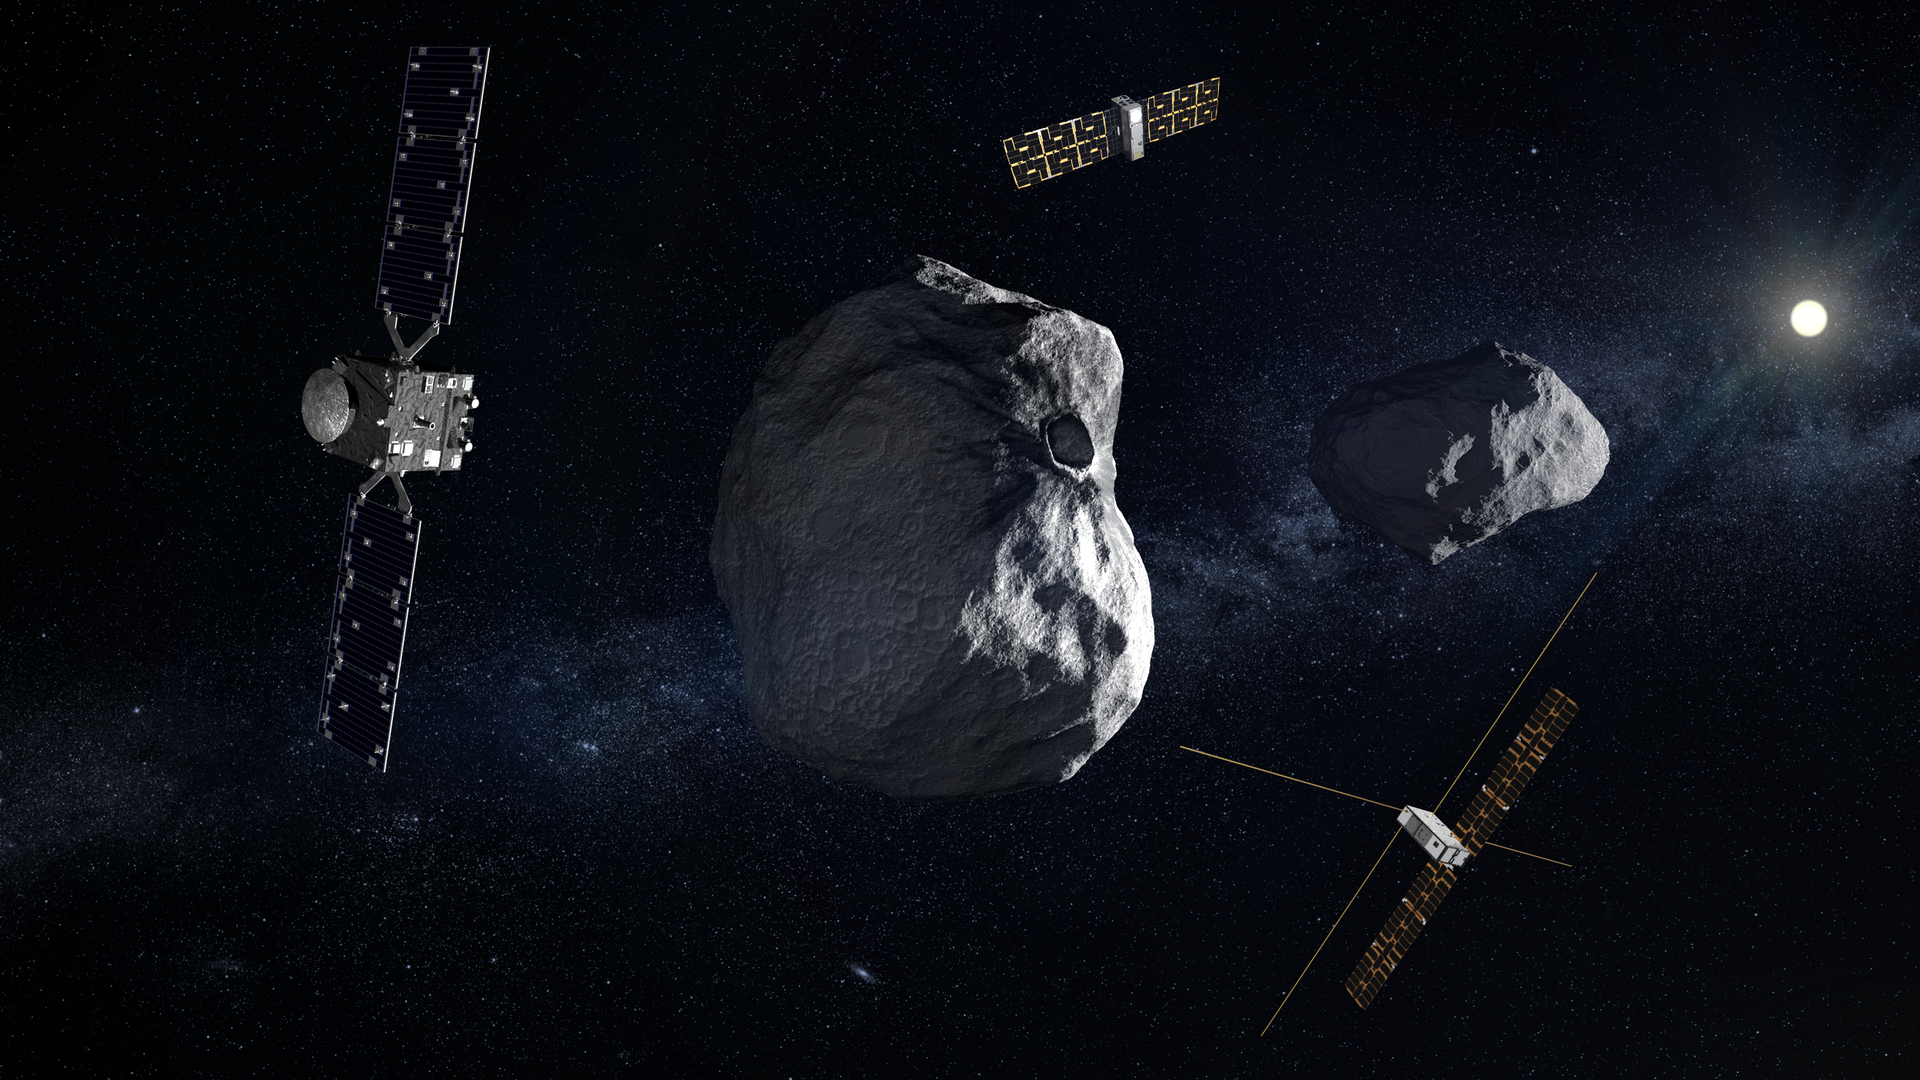 ESA - CubeSats joining Hera mission to asteroid system